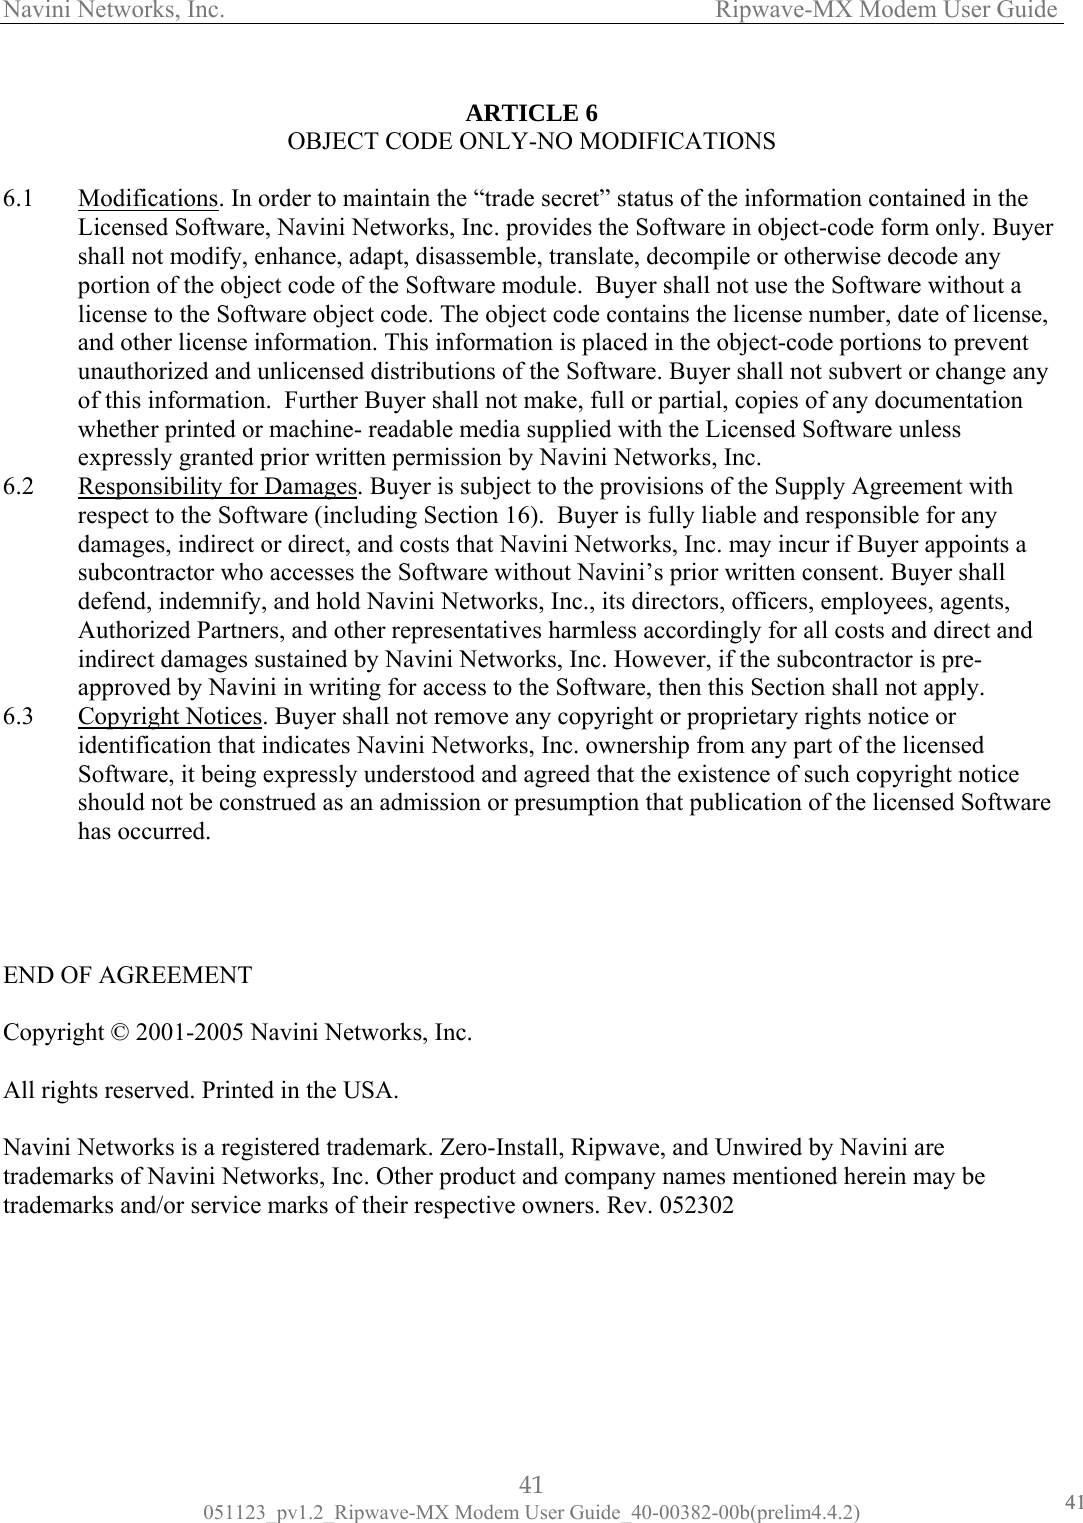 Navini Networks, Inc.                   Ripwave-MX Modem User Guide  ARTICLE 6 OBJECT CODE ONLY-NO MODIFICATIONS   cations6.1 Modifi . In order to maintain the “trade secret” status of the information contained in the  shall noportionand other license information. This information is placed in the object-code portions to prevent unauthorized and unlicensed distributions of the Software. Buyer shall not subvert or change any unless 6.2 Licensed Software, Navini Networks, Inc. provides the Software in object-code form only. Buyert modify, enhance, adapt, disassemble, translate, decompile or otherwise decode any  of the object code of the Software module.  Buyer shall not use the Software without a license to the Software object code. The object code contains the license number, date of license, of this information.  Further Buyer shall not make, full or partial, copies of any documentation whether printed or machine- readable media supplied with the Licensed Software expressly granted prior written permission by Navini Networks, Inc. Responsibility for Damages. Buyer is subject to the provisions of the Supply Agreement with respect to the Software (including Section 16).  Buyer is fully liable and responsible for any damages, indirect or direct, and costs that Navini Networks, Inc. may incur if Buyer apposubcontractor who accesses the Software without Navini’s prior written consent. Buyer shall defend, indemnify, and hold Navini Netwints a orks, Inc., its directors, officers, employees, agents, Authorized Partners, and other representatives harmless accordingly for all costs and direct and indirect damages sustained by Navini Networks, Inc. However, if the subcontractor is pre-approved by Navini in writing for access to the Software, then this Section shall not apply. 6.3 Copyright Notices. Buyer shall not remove any copyright or proprietary rights notice or identification that indicates Navini Networks, Inc. ownership from any part of the licensed  ware     Copyri All righ Navinitrademtradem spective owners. Rev. 052302       Software, it being expressly understood and agreed that the existence of such copyright noticeshould not be construed as an admission or presumption that publication of the licensed Softhas occurred.   END OF AGREEMENT ght © 2001-2005 Navini Networks, Inc. ts reserved. Printed in the USA.  Networks is a registered trademark. Zero-Install, Ripwave, and Unwired by Navini are arks of Navini Networks, Inc. Other product and company names mentioned herein may be arks and/or service marks of their re41 051123_pv1.2_Ripwave-MX Modem User Guide_40-00382-00b(prelim4.4.2) 4141